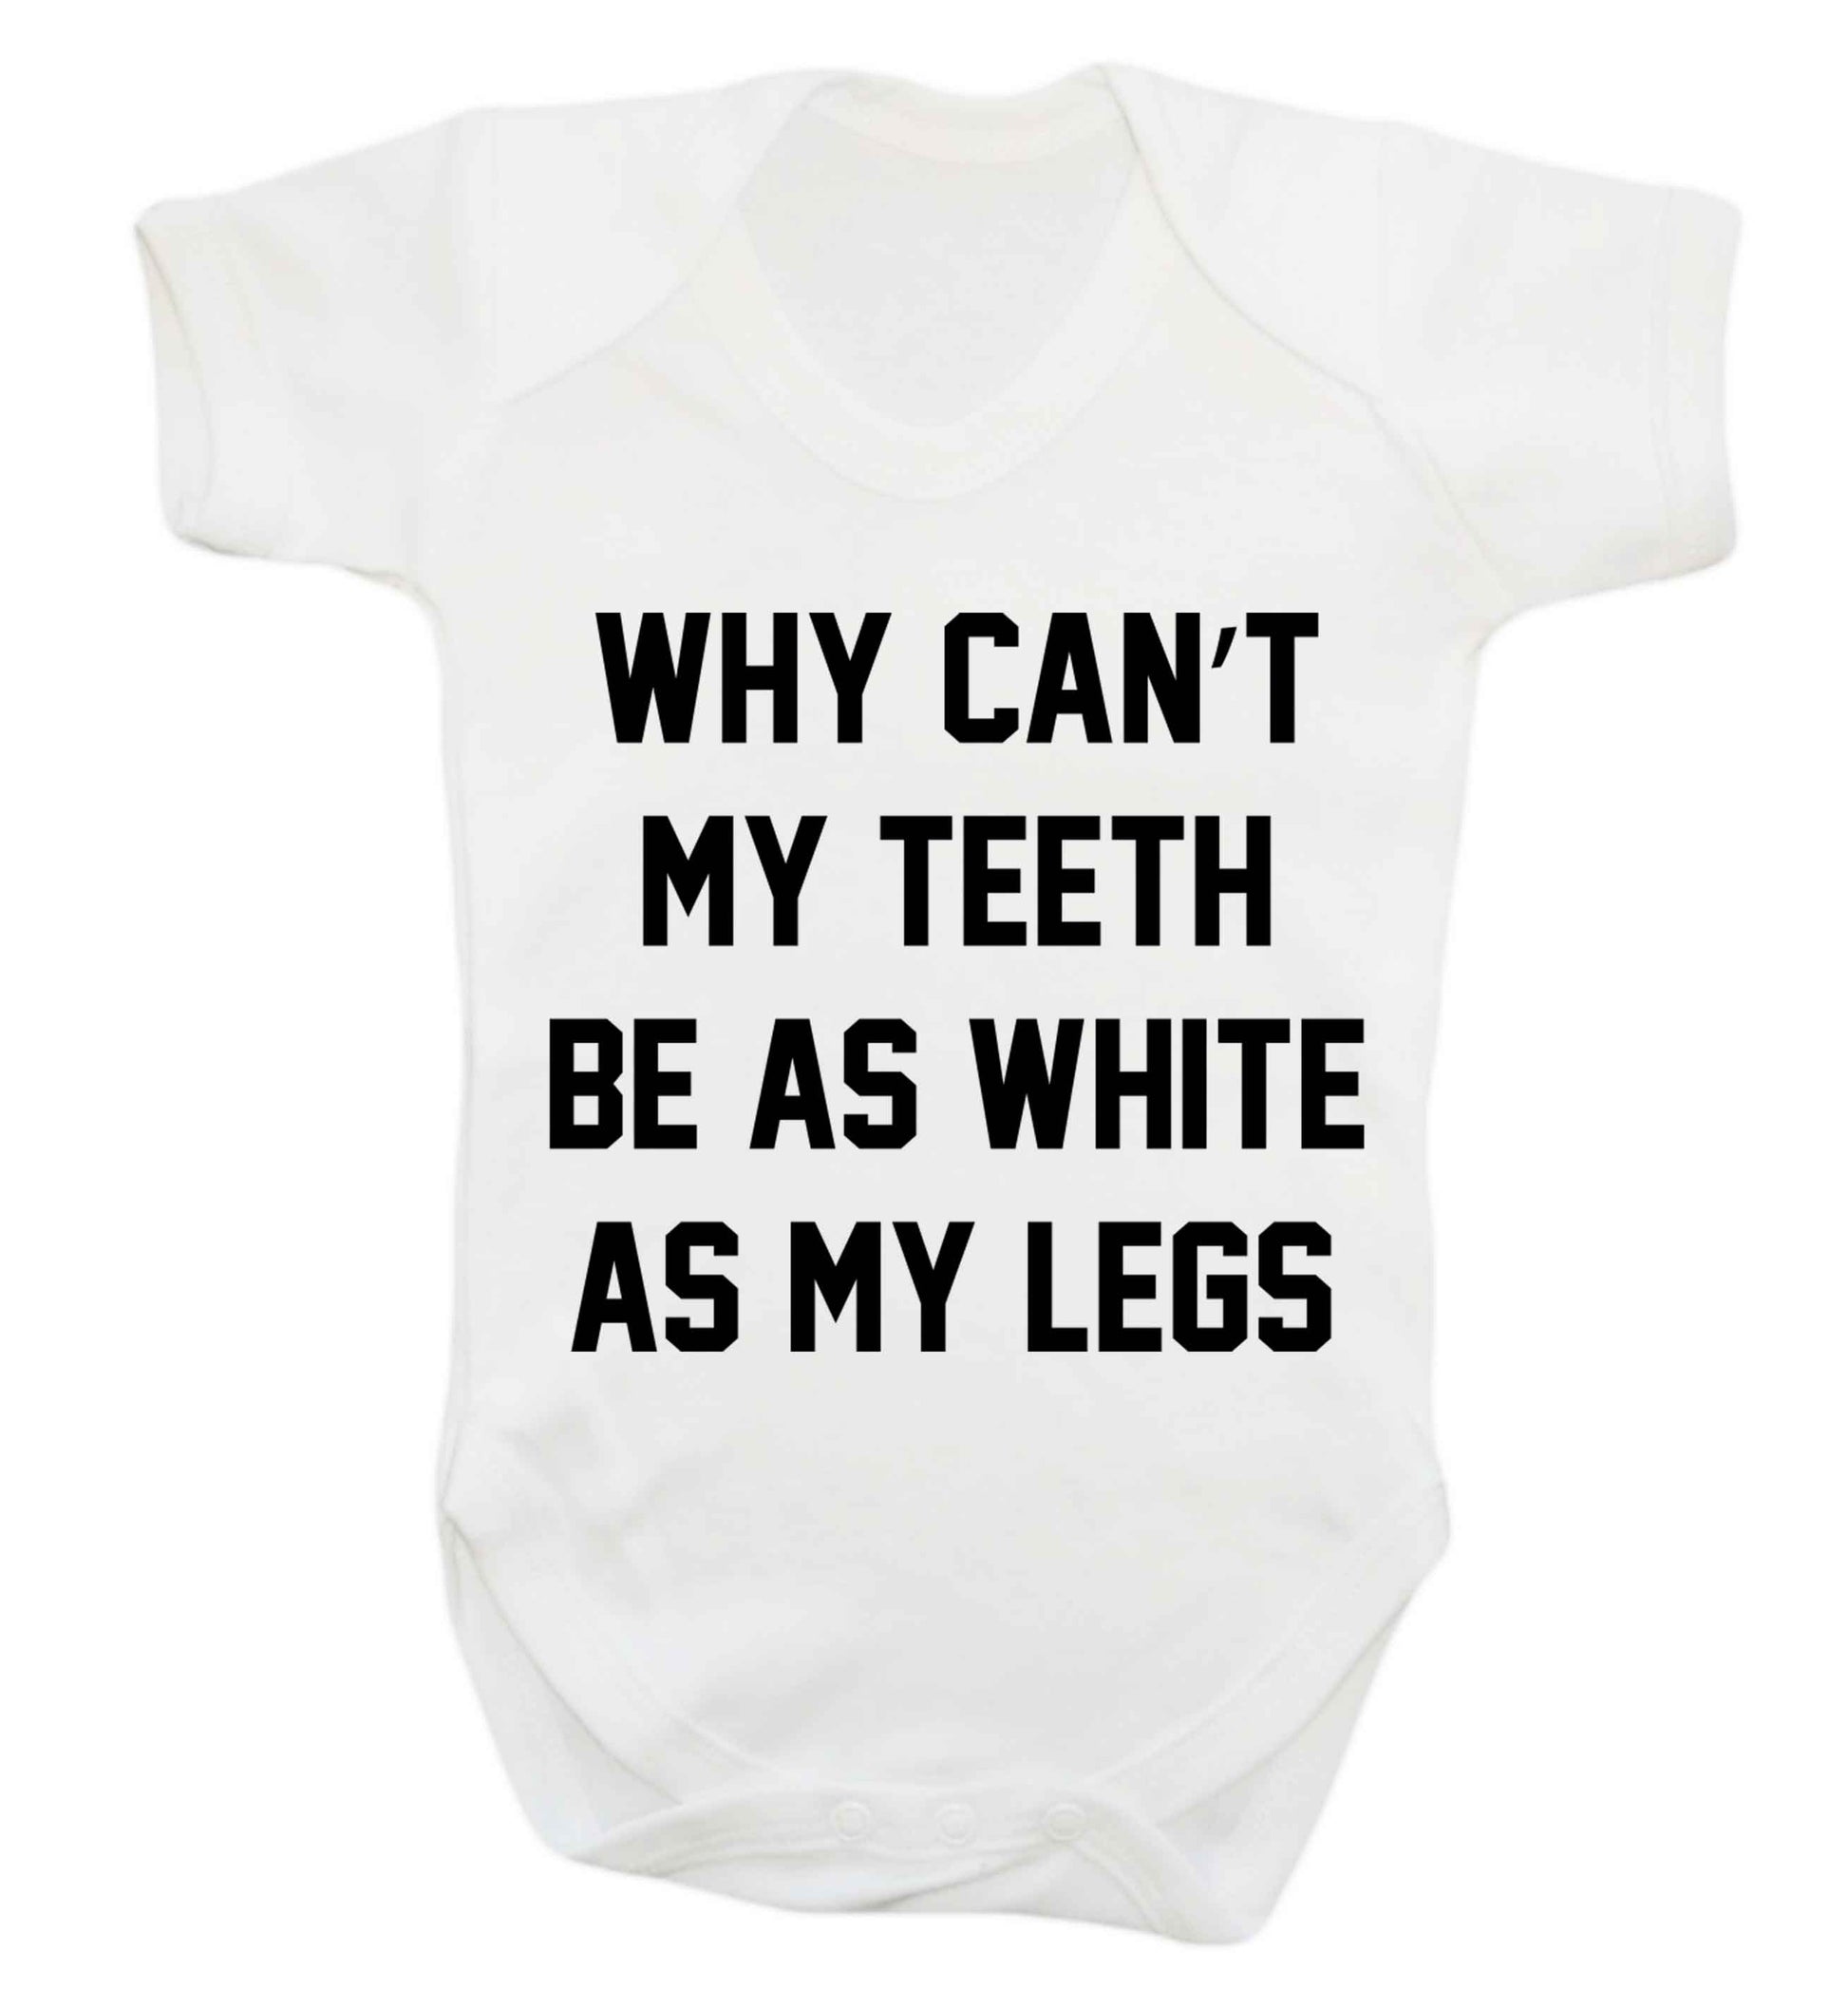 Why can't my teeth be as white as my legs Baby Vest white 18-24 months